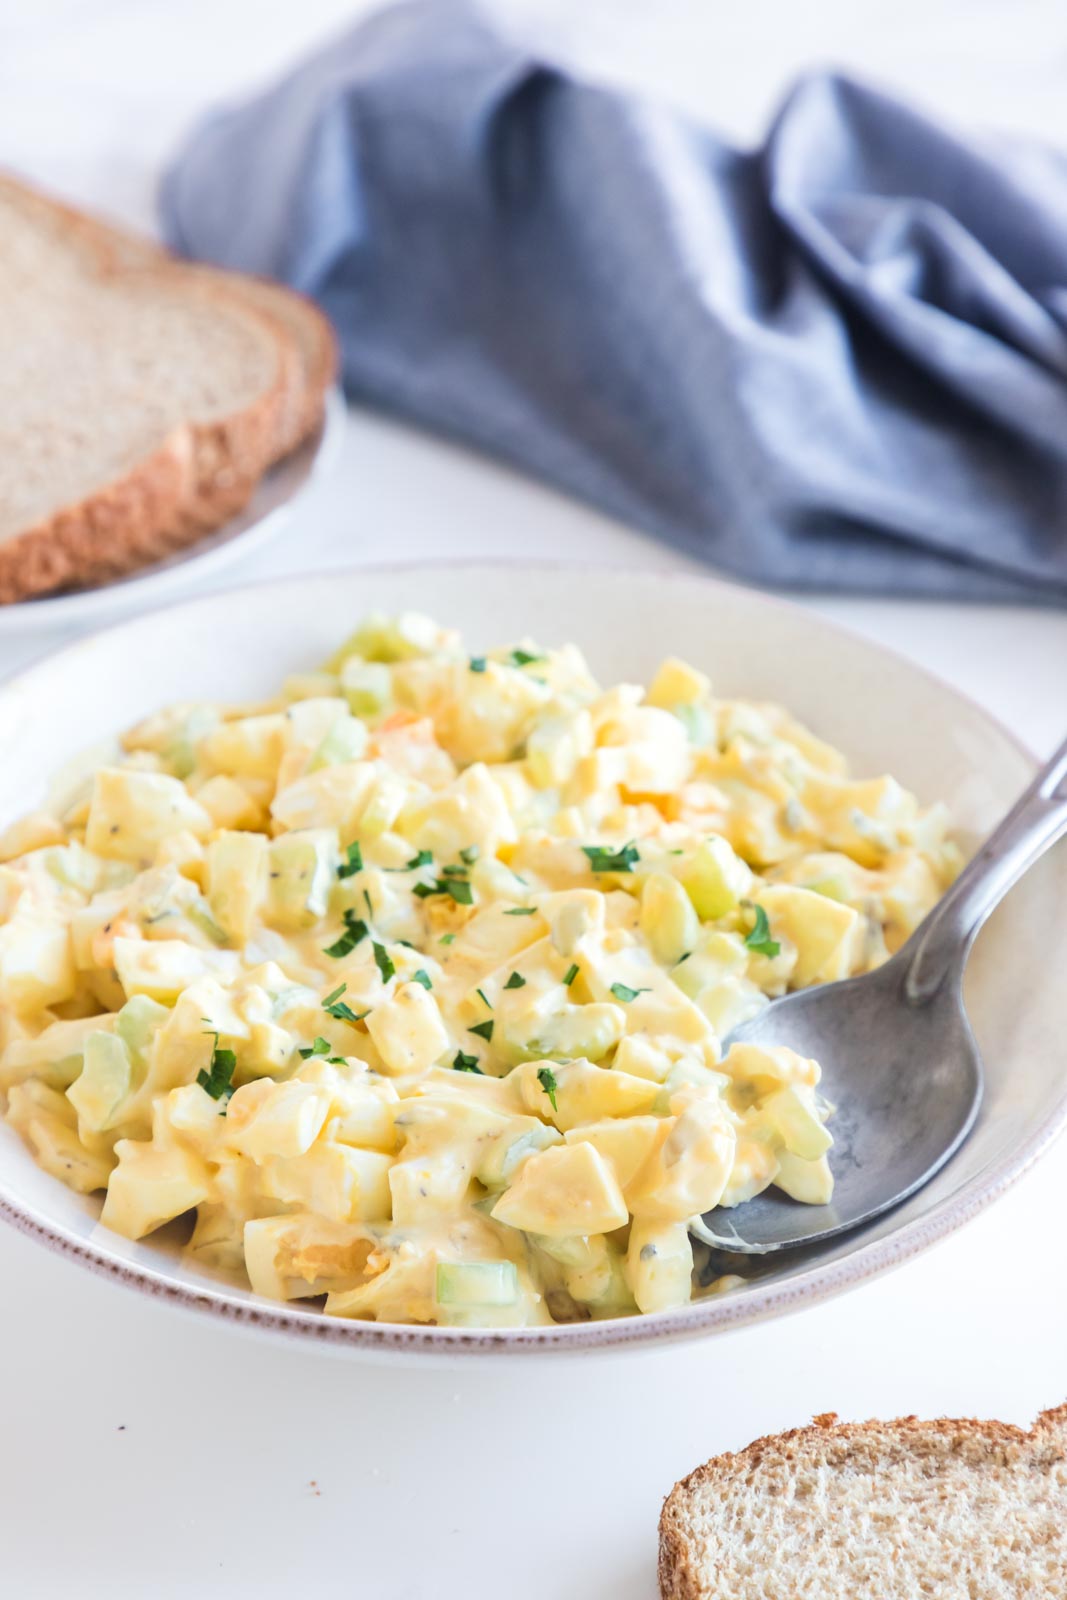 a bowl of egg salad on a table with a spoon and a napkin 